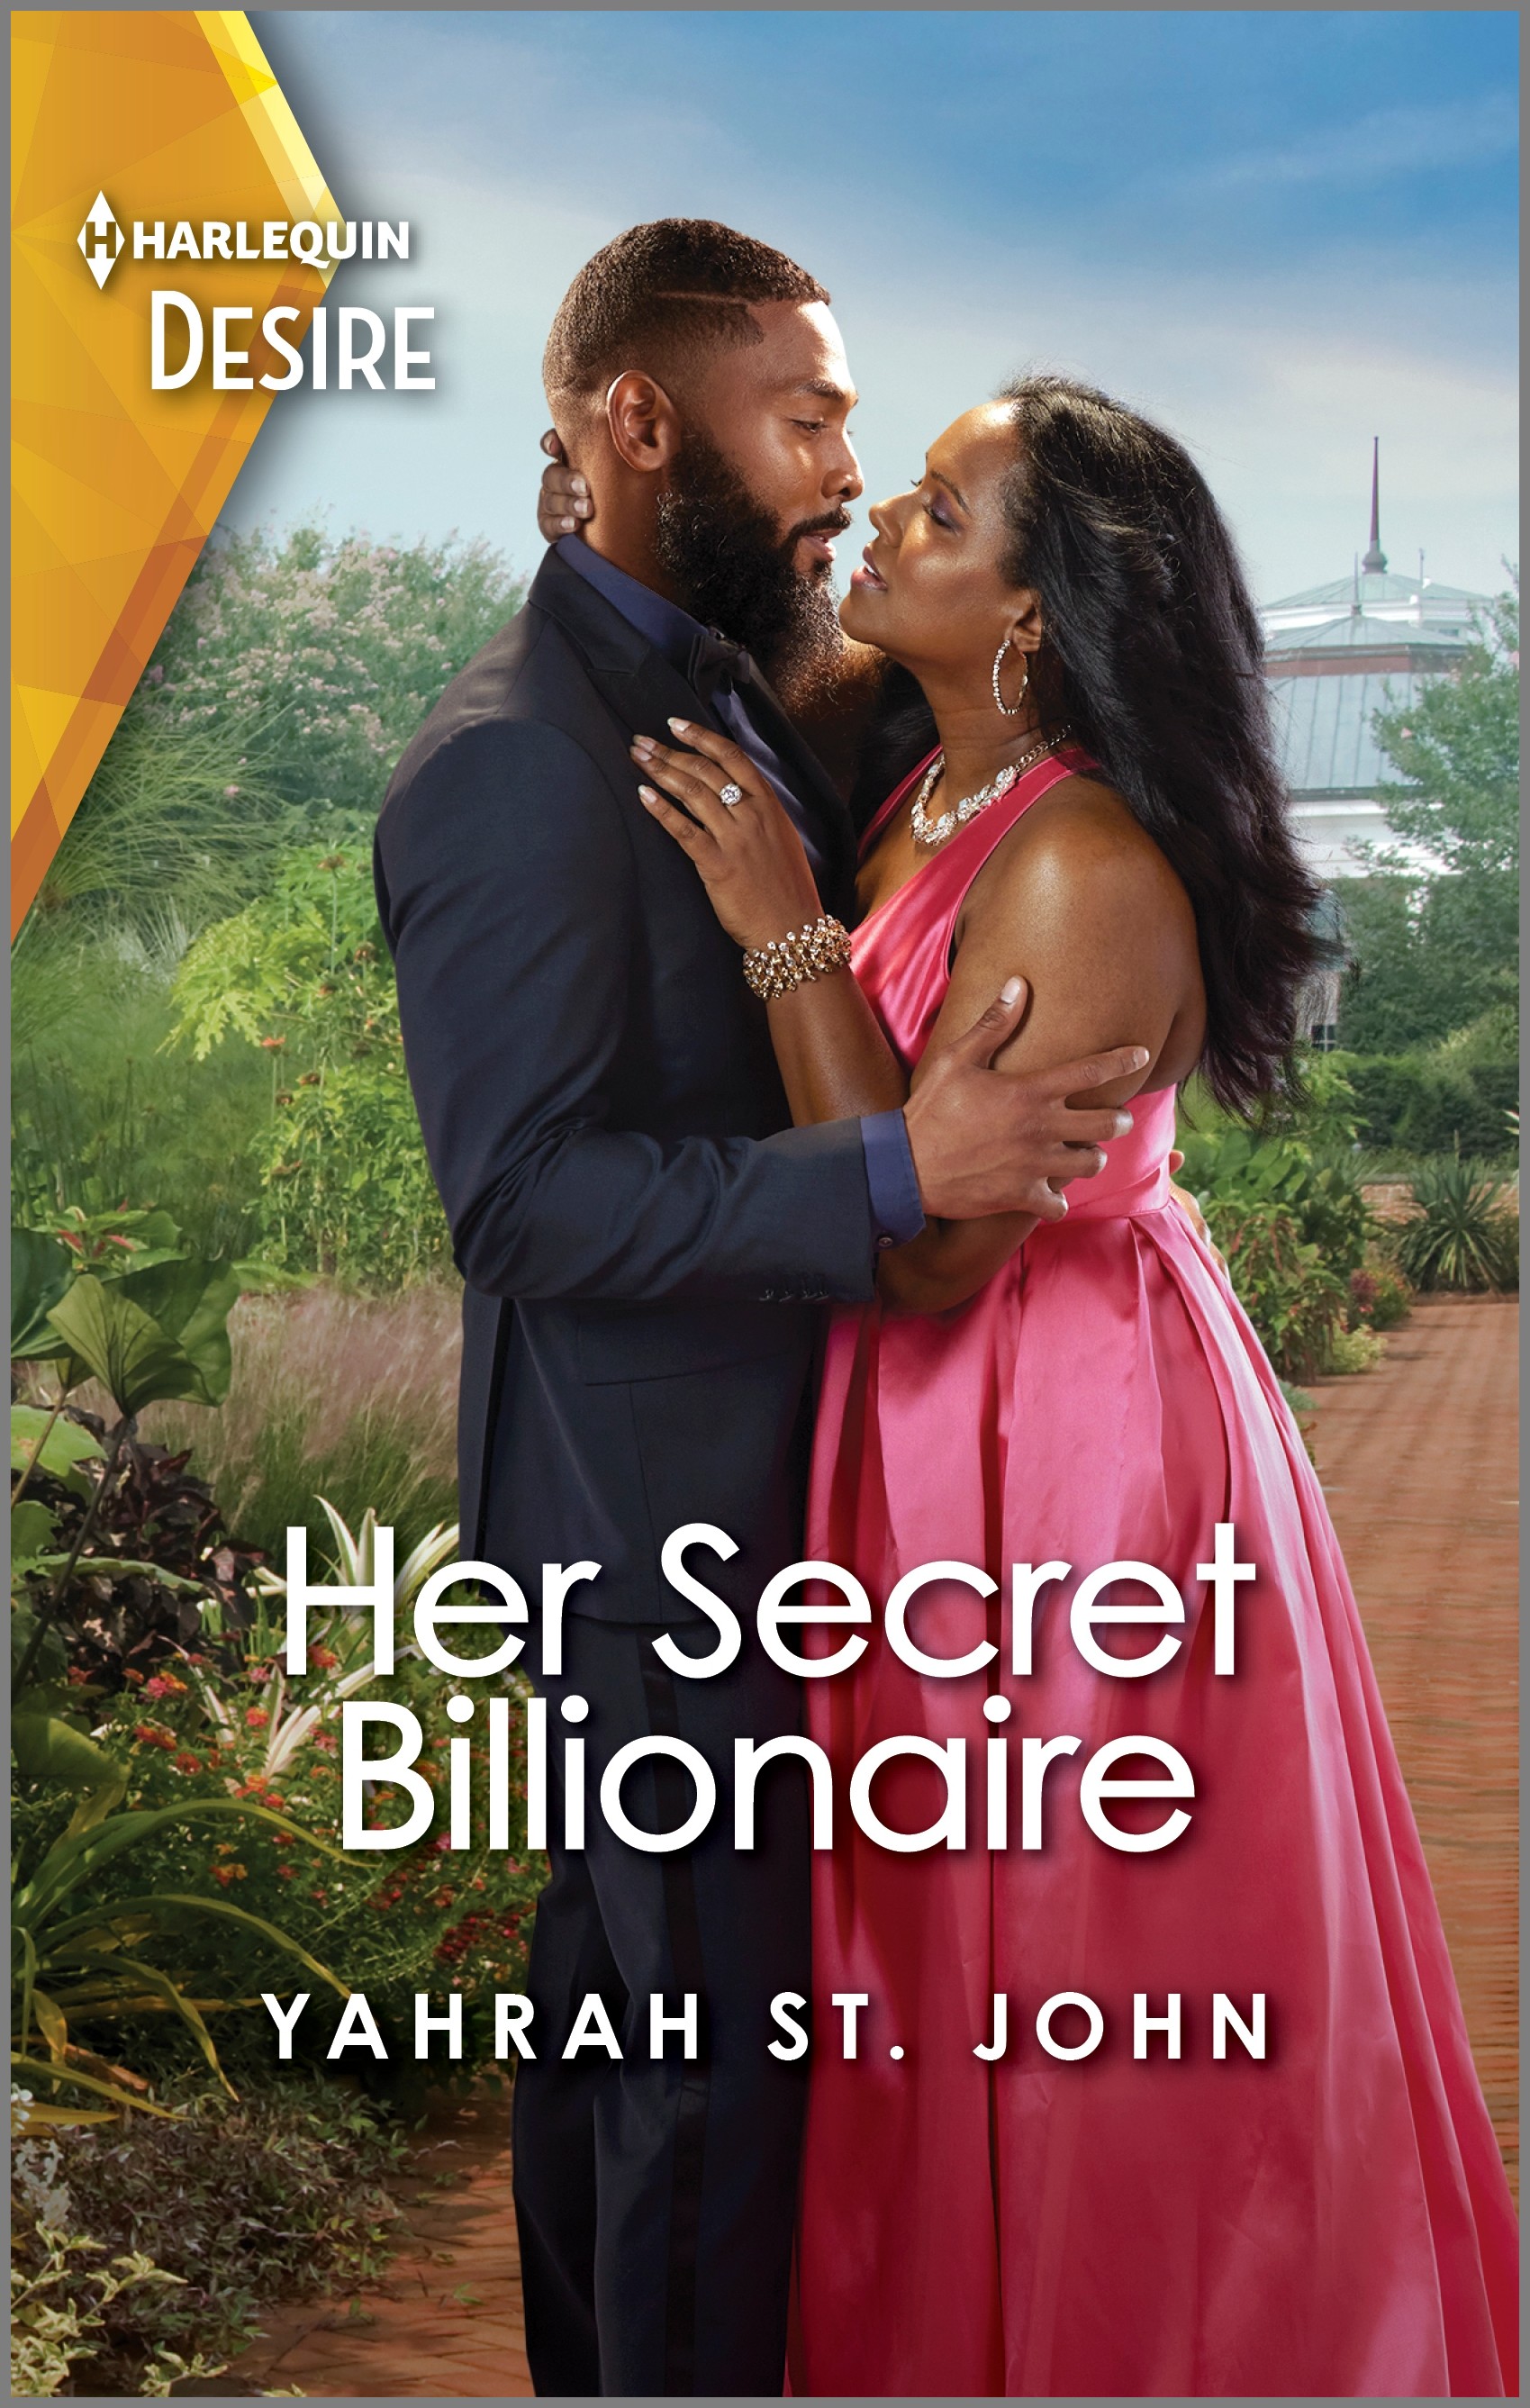 Cover image for HER SECRET BILLIONAIRE by Yahrah St. John, featuring a man and a woman embracing outdoors in a garden. The man is in a suit and the woman is in a dress.